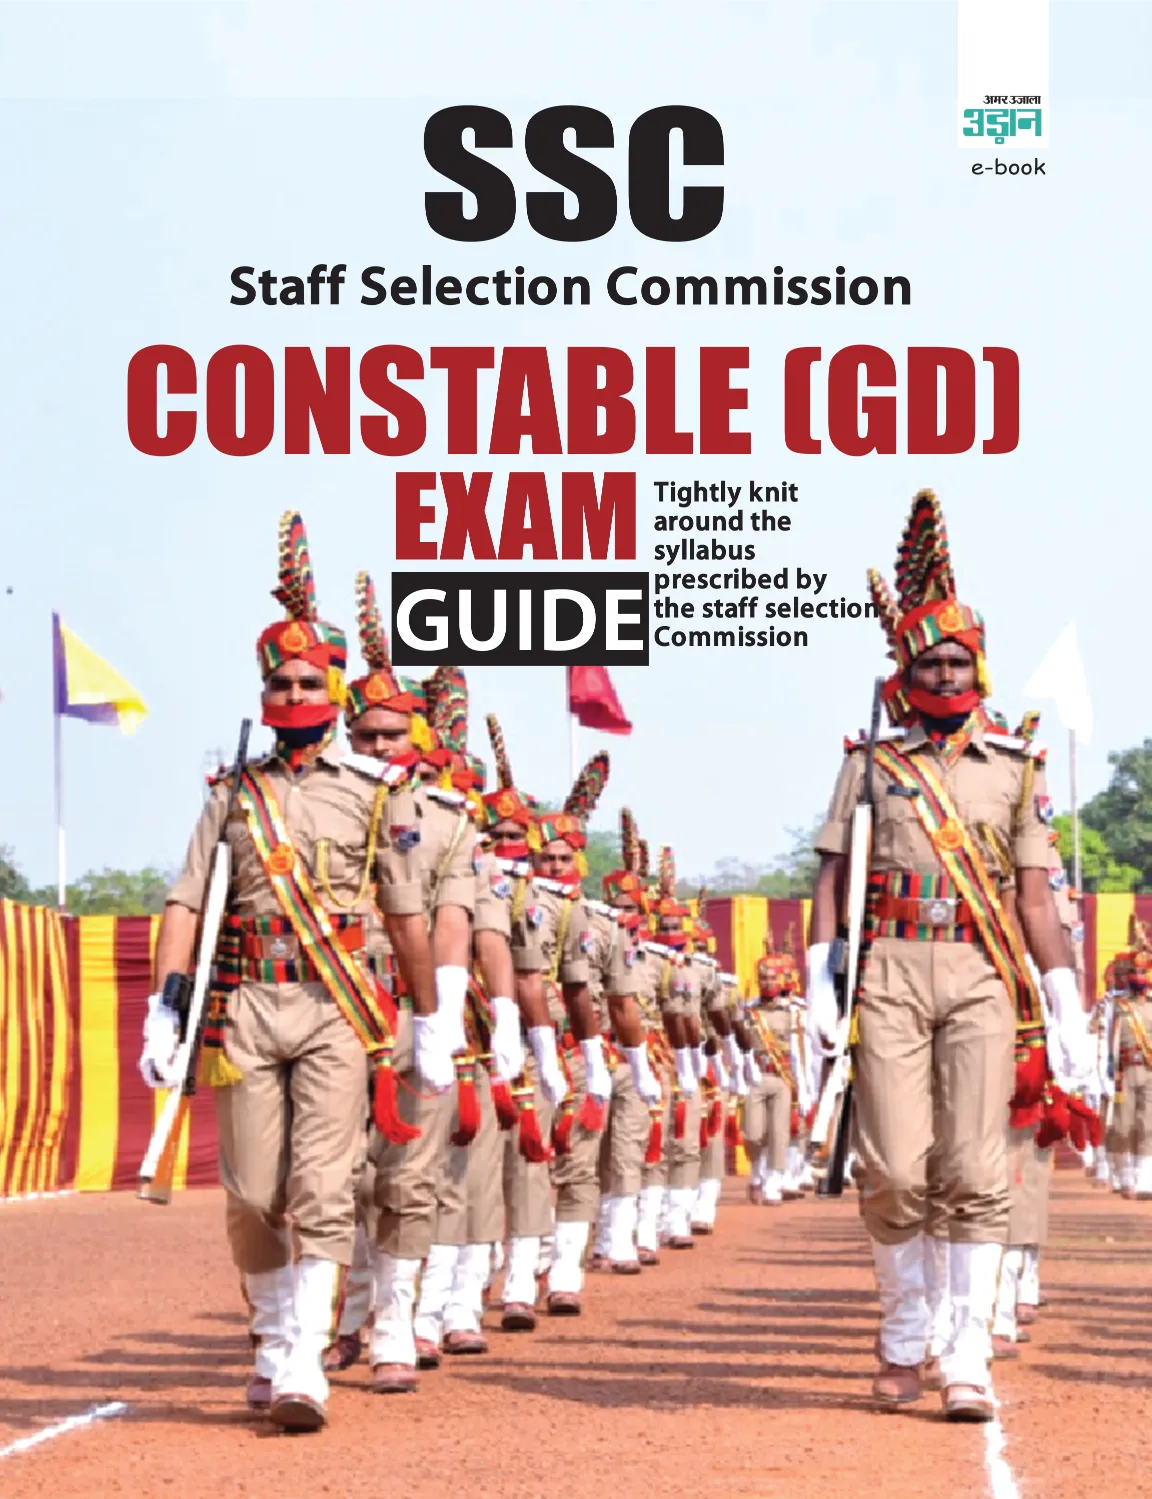 Staff Selection Commission (SSC) Constable (GD) Exam Guide and Practice Book